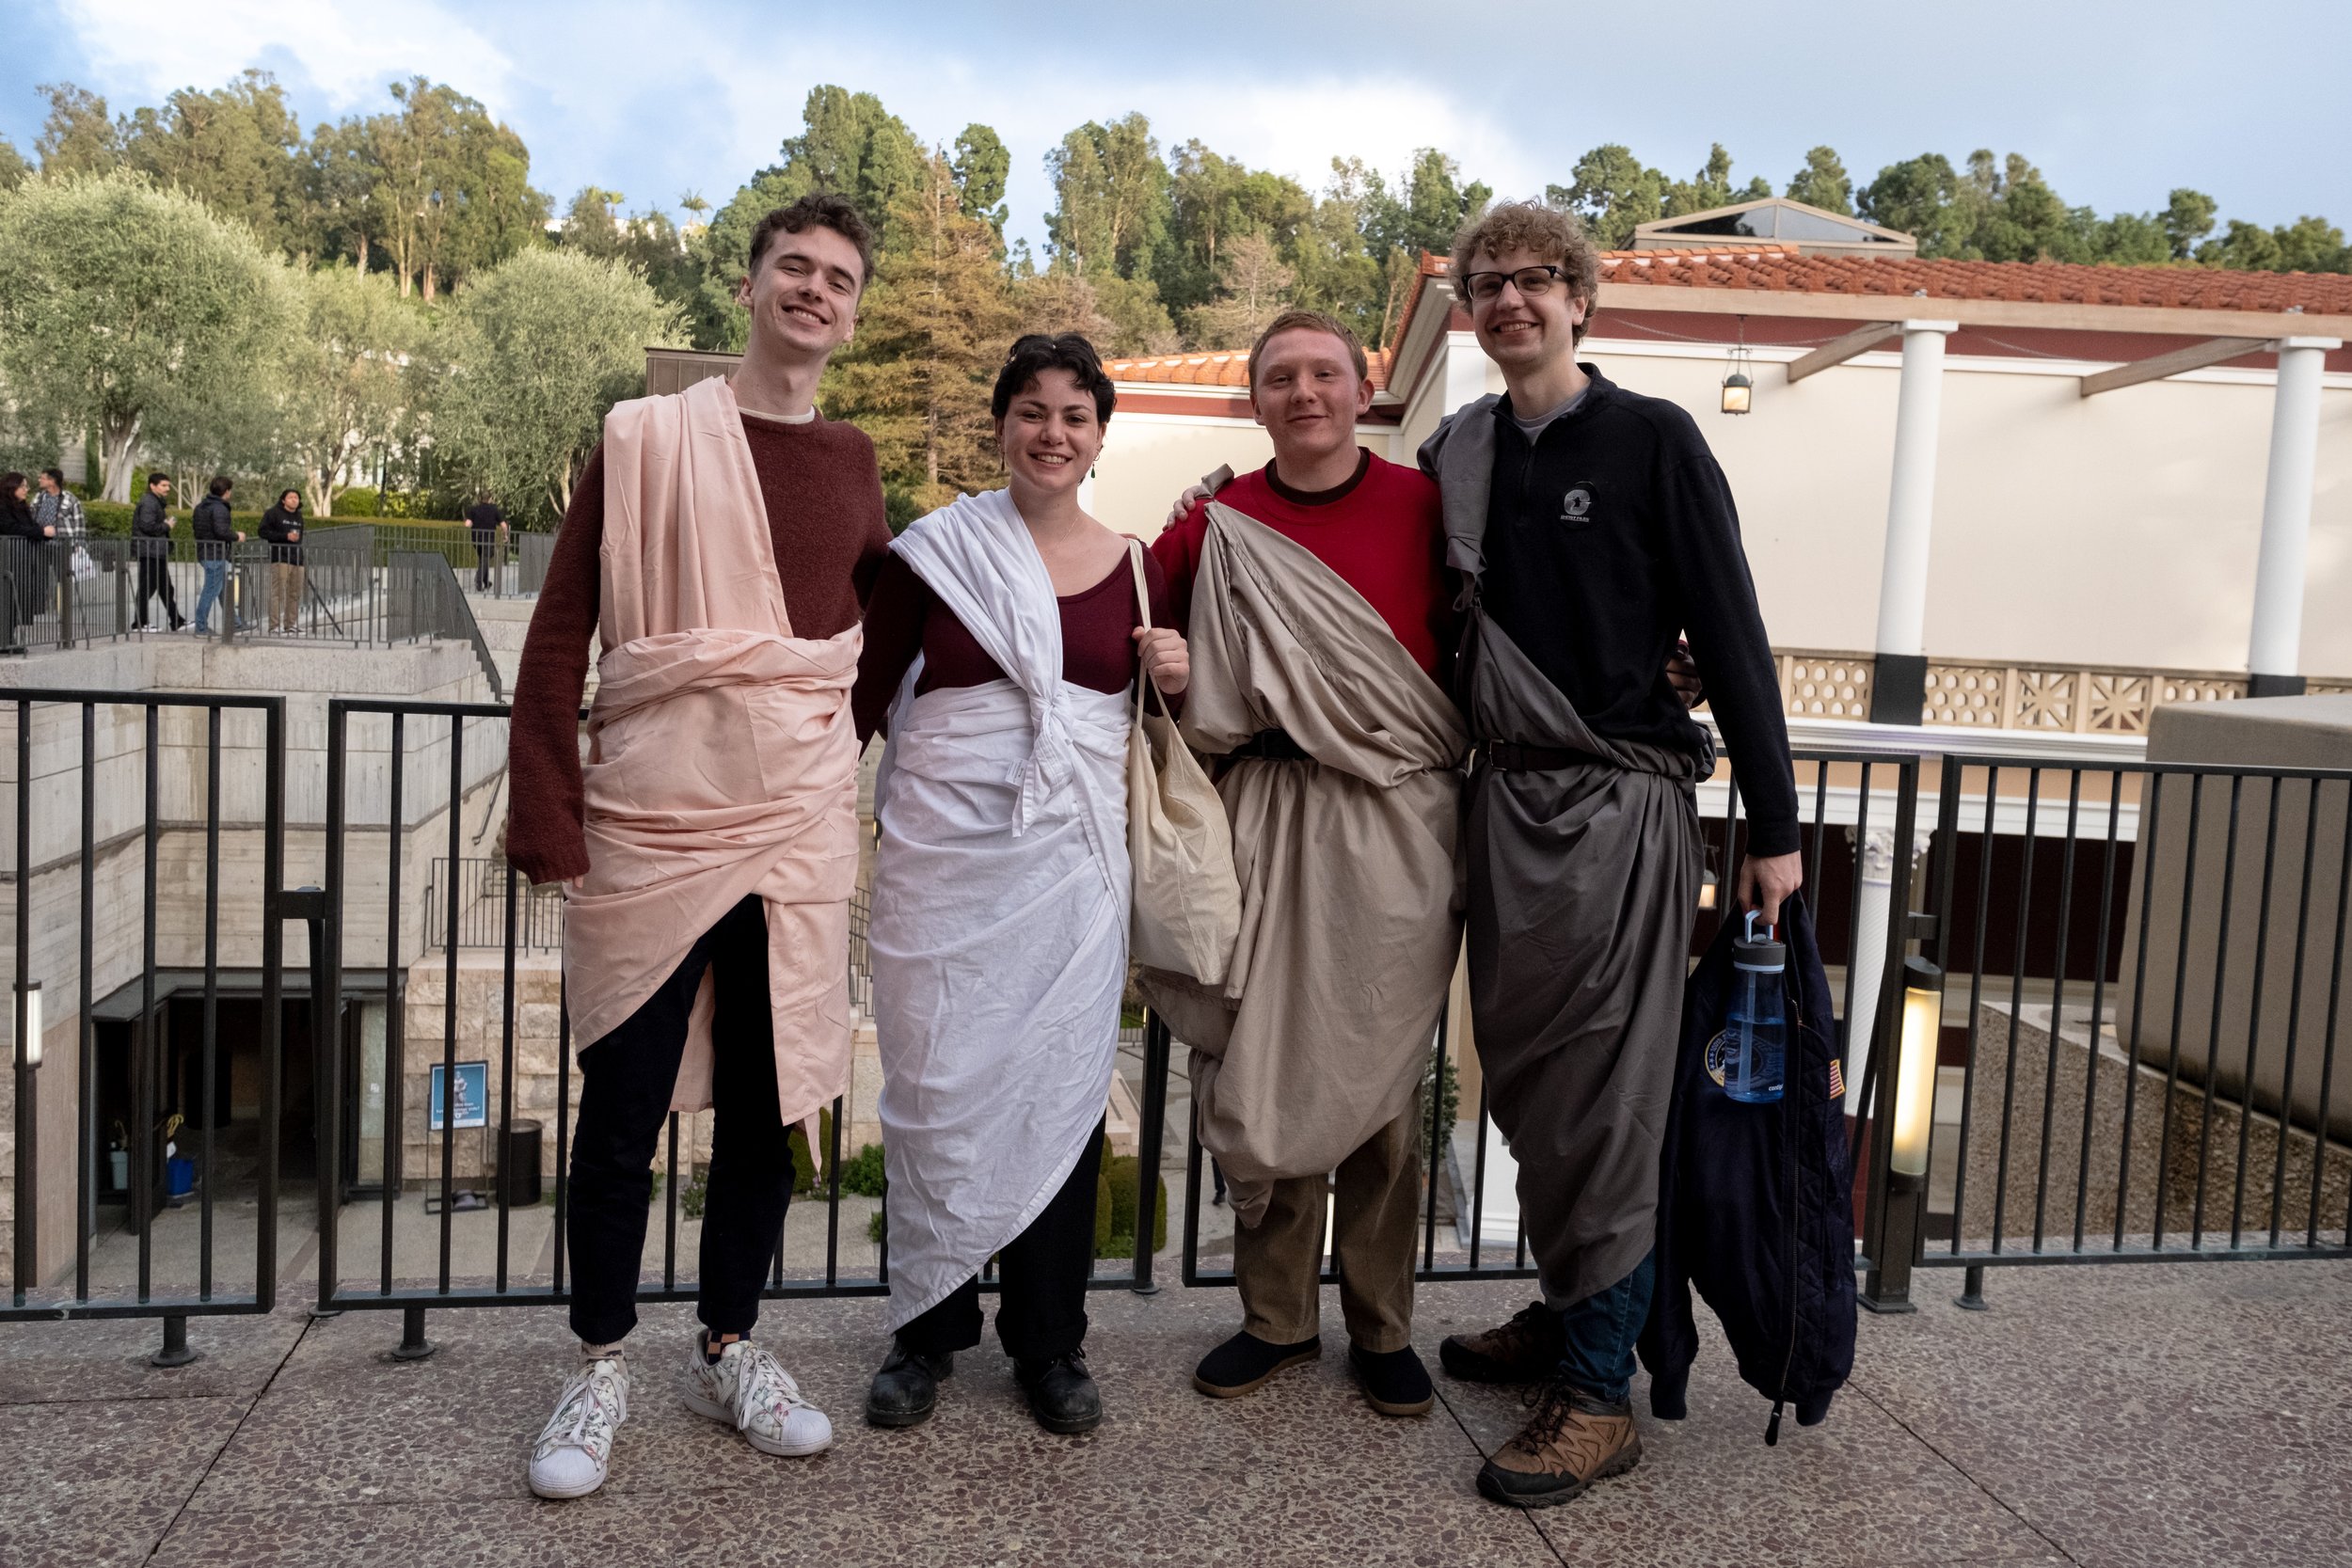  From L to R, Kevin Orzel (friend, not a student), Sophia Berry (Classics major), Zach Coulter (Political Science major), Dylan Jeninga (Creative Writing major). They are members of a Classics Book Club, and came from USC to attend College Night at t